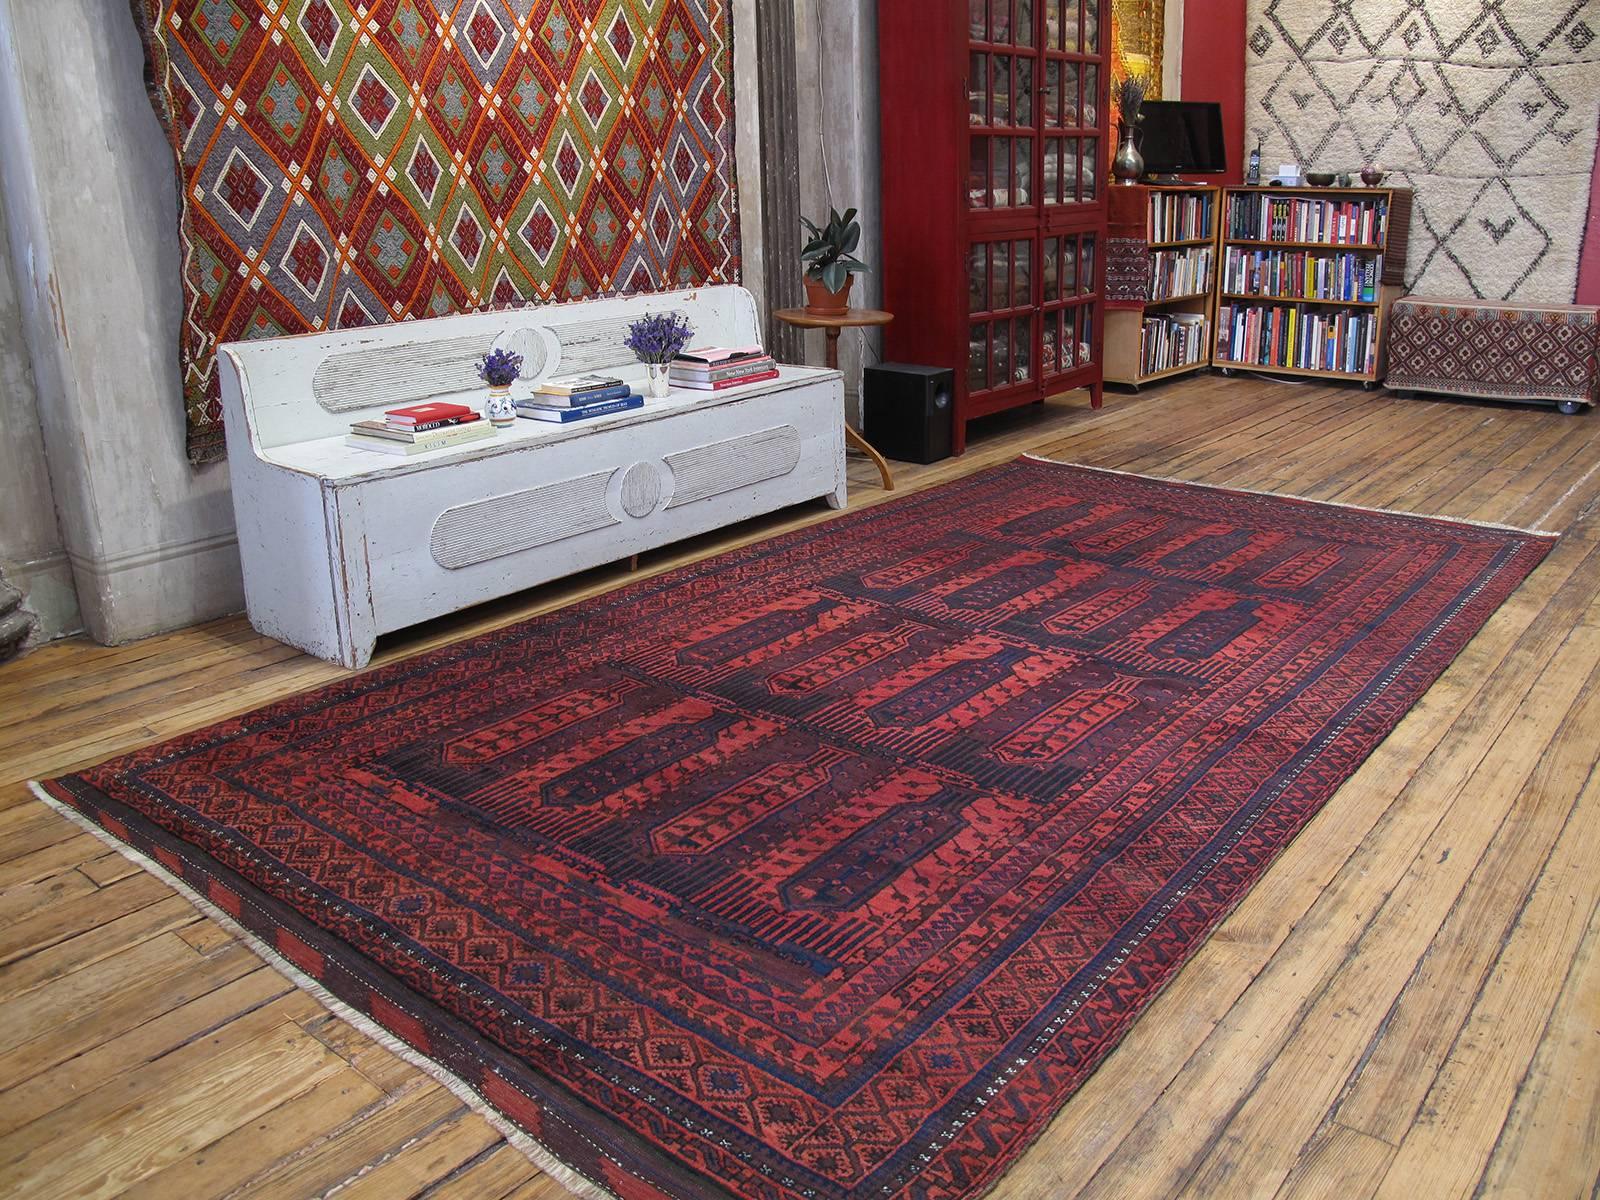 Large Baluch Tribal carpet or rug. A very nice and unusually large example of tribal weaving from the border regions between Iran and Afghanistan, attributed to one of the groups generally referred to as Baluch. Displaying a vibrant tribal